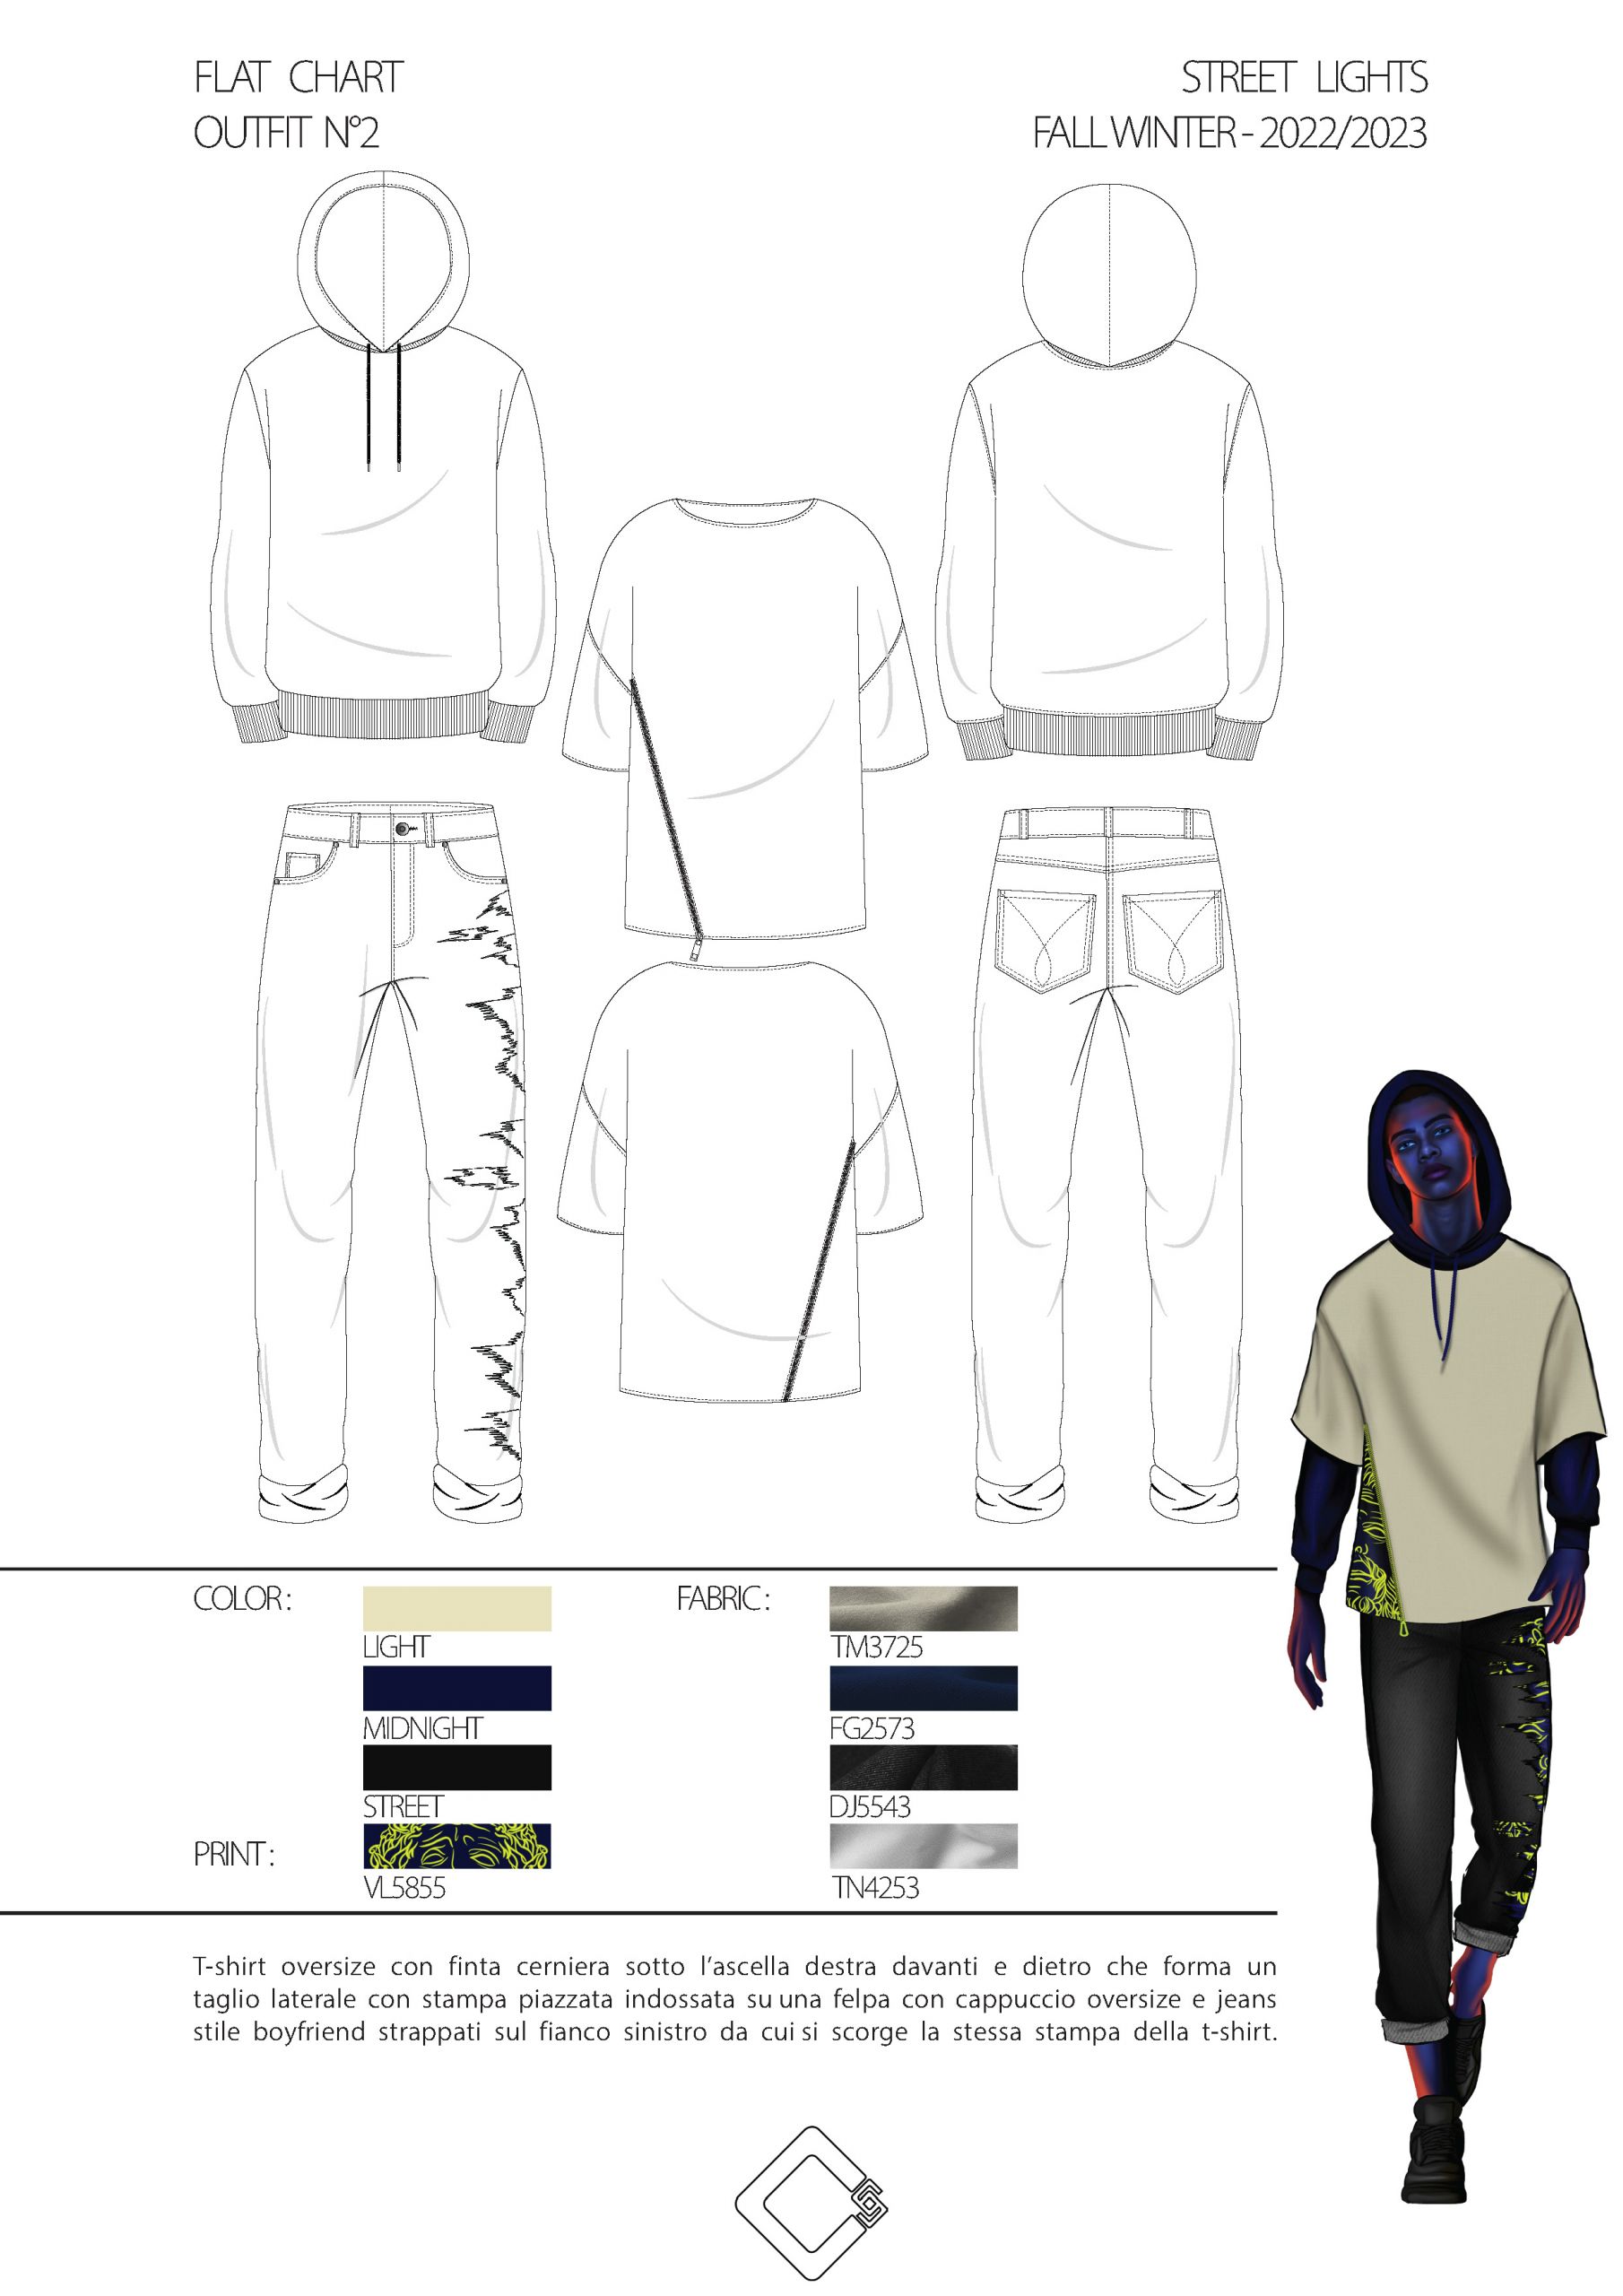 Flat chart outfit (2)